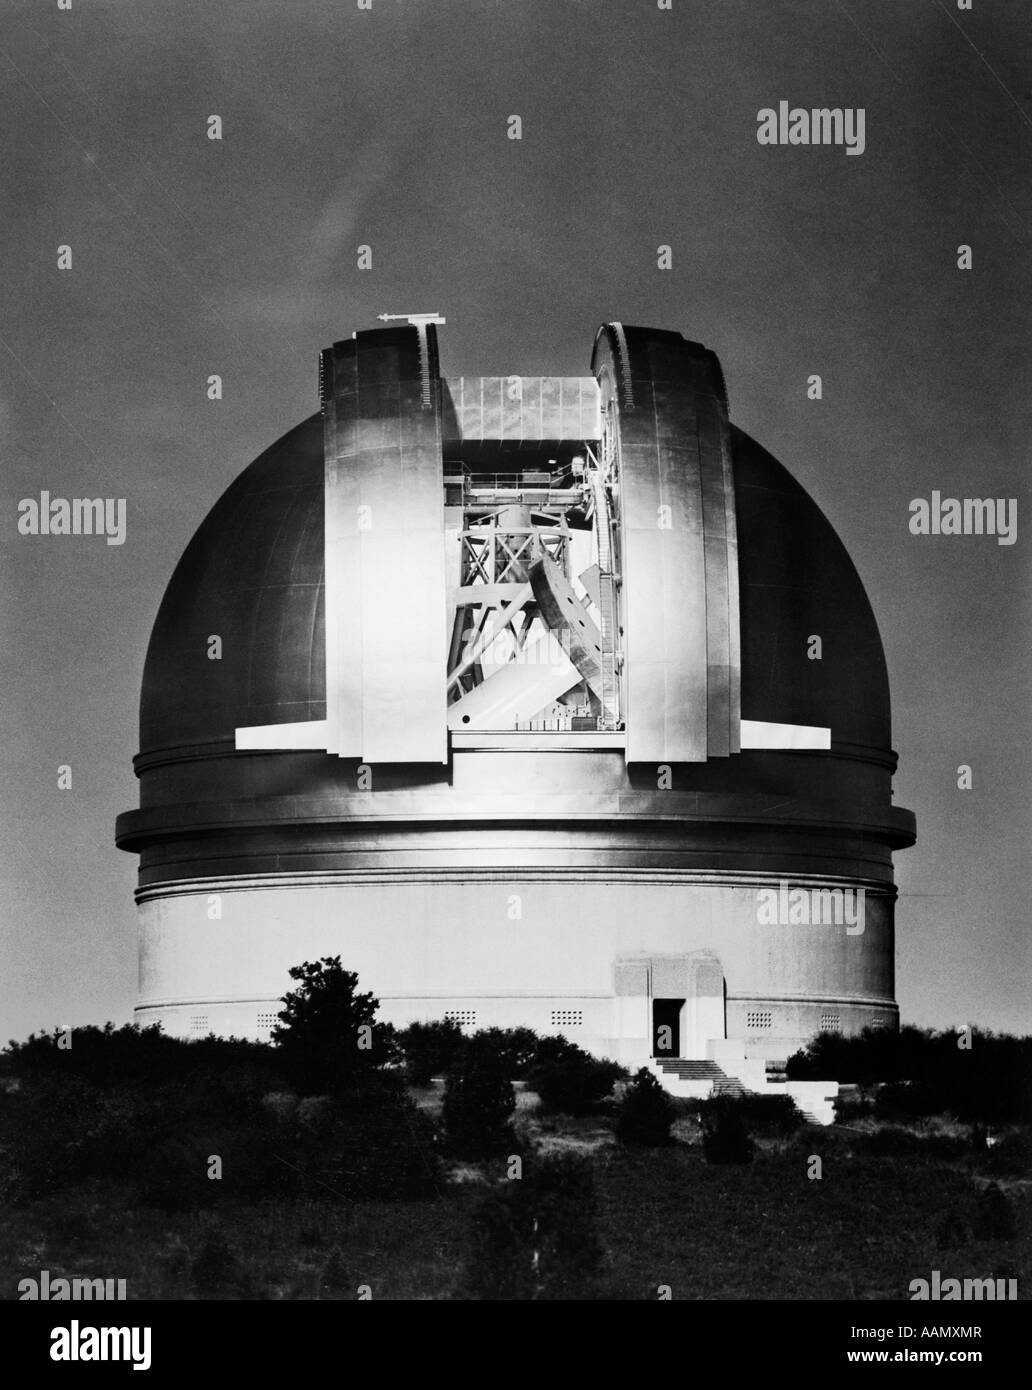 1960s MOONLIGHT VIEW OF PALOMAR OBSERVATORY WITH 200-INCH HALE TELESCOPE DOME Stock Photo